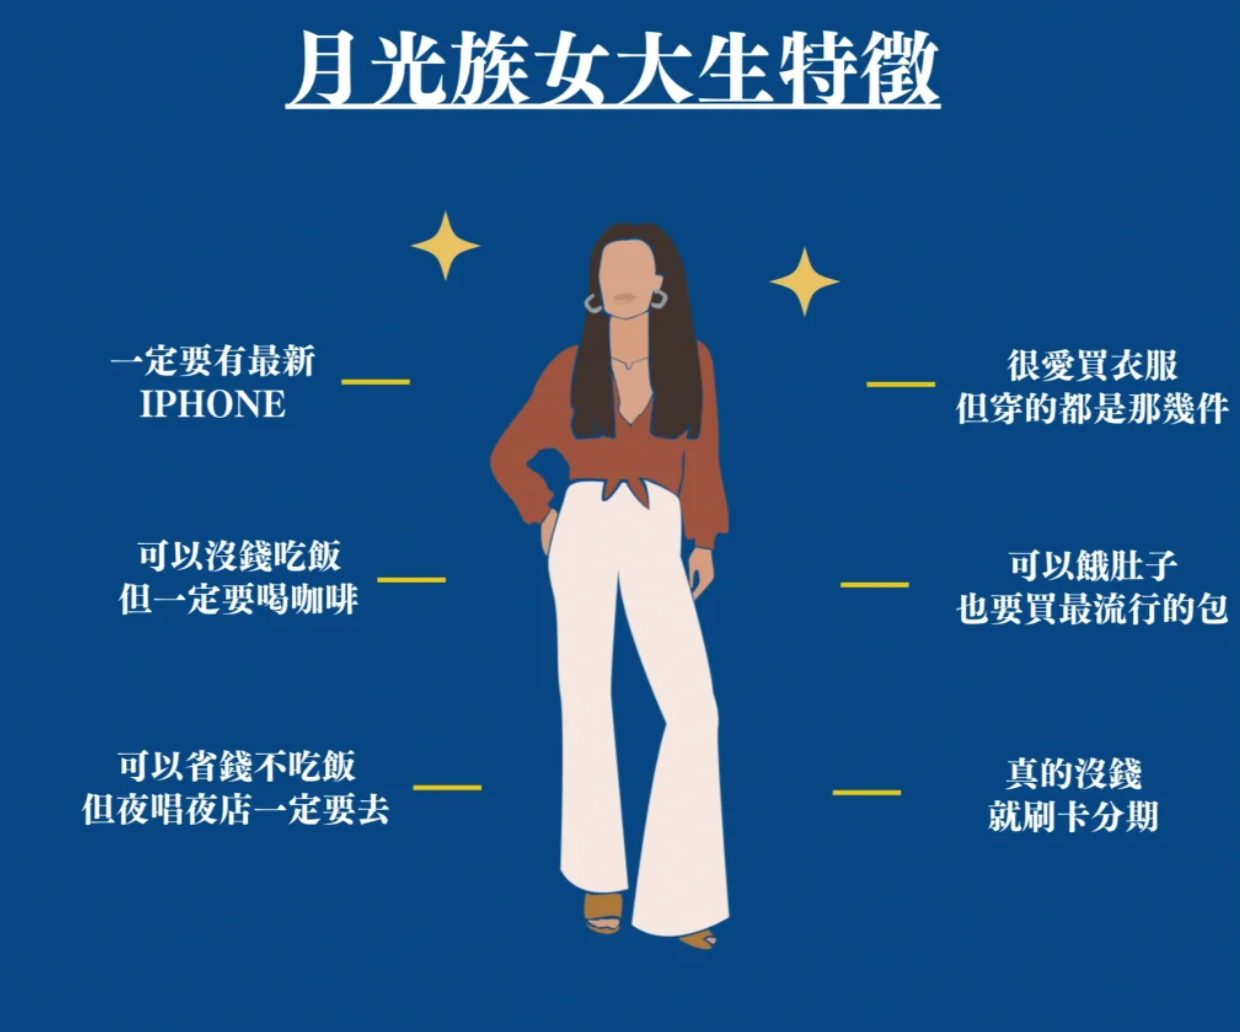 This Xiaohongshu post says "Characteristics of a moonlight clan girl: must have the latest iPhone, can eat without money but must drink coffee, can go hungry but still buy the most popular bag". Image: Xiaohongshu